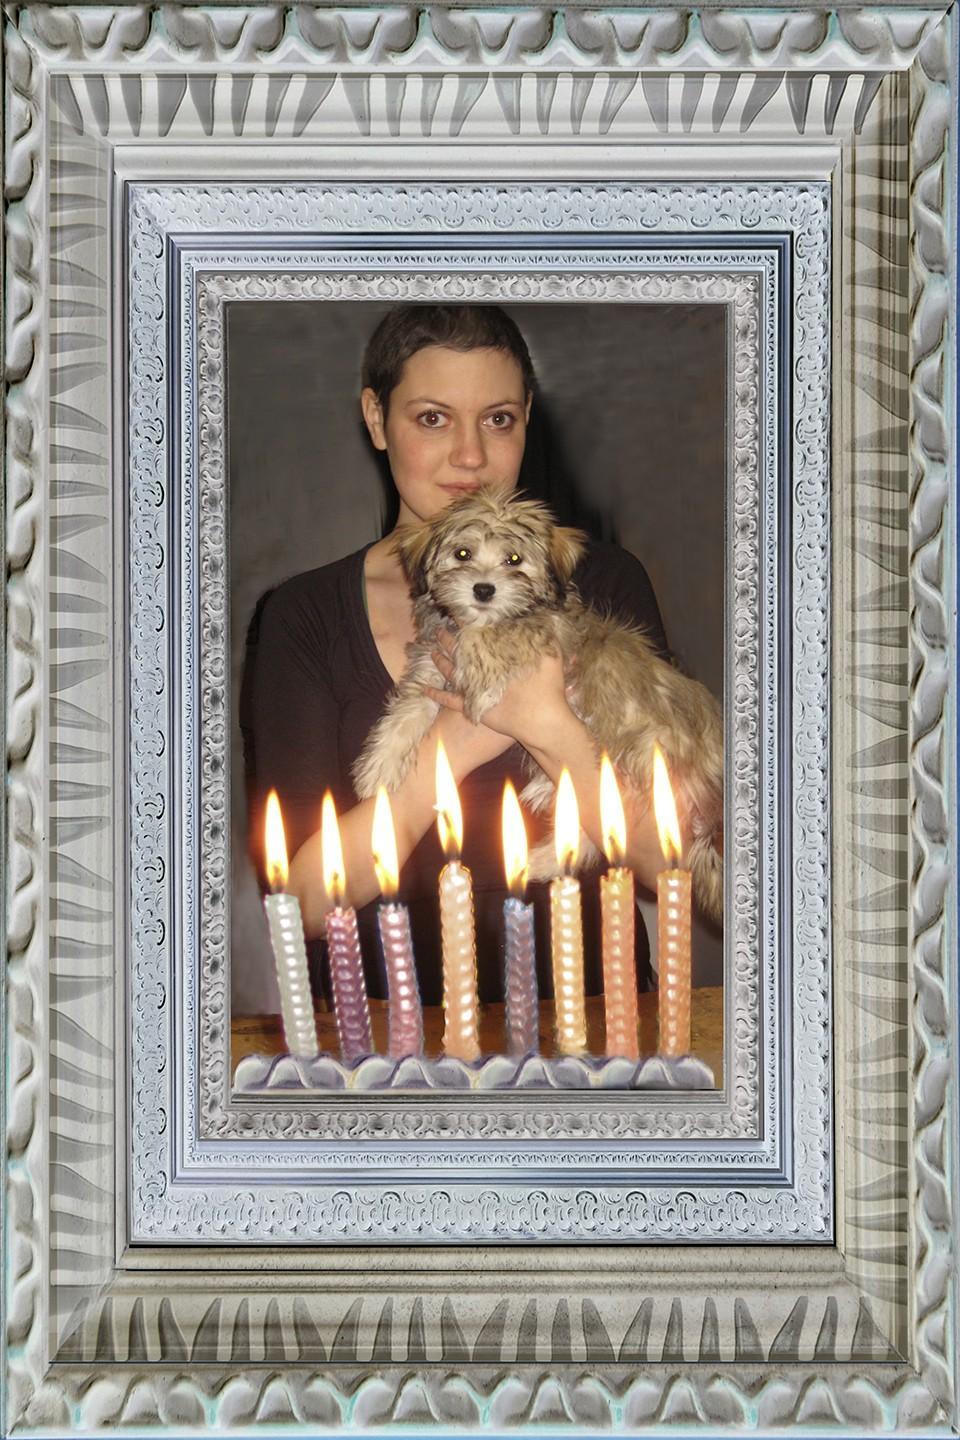 Robin Botie of Ithaca, New York photoshops a memory of lighting candles on birthday cakes for her daughter who died.